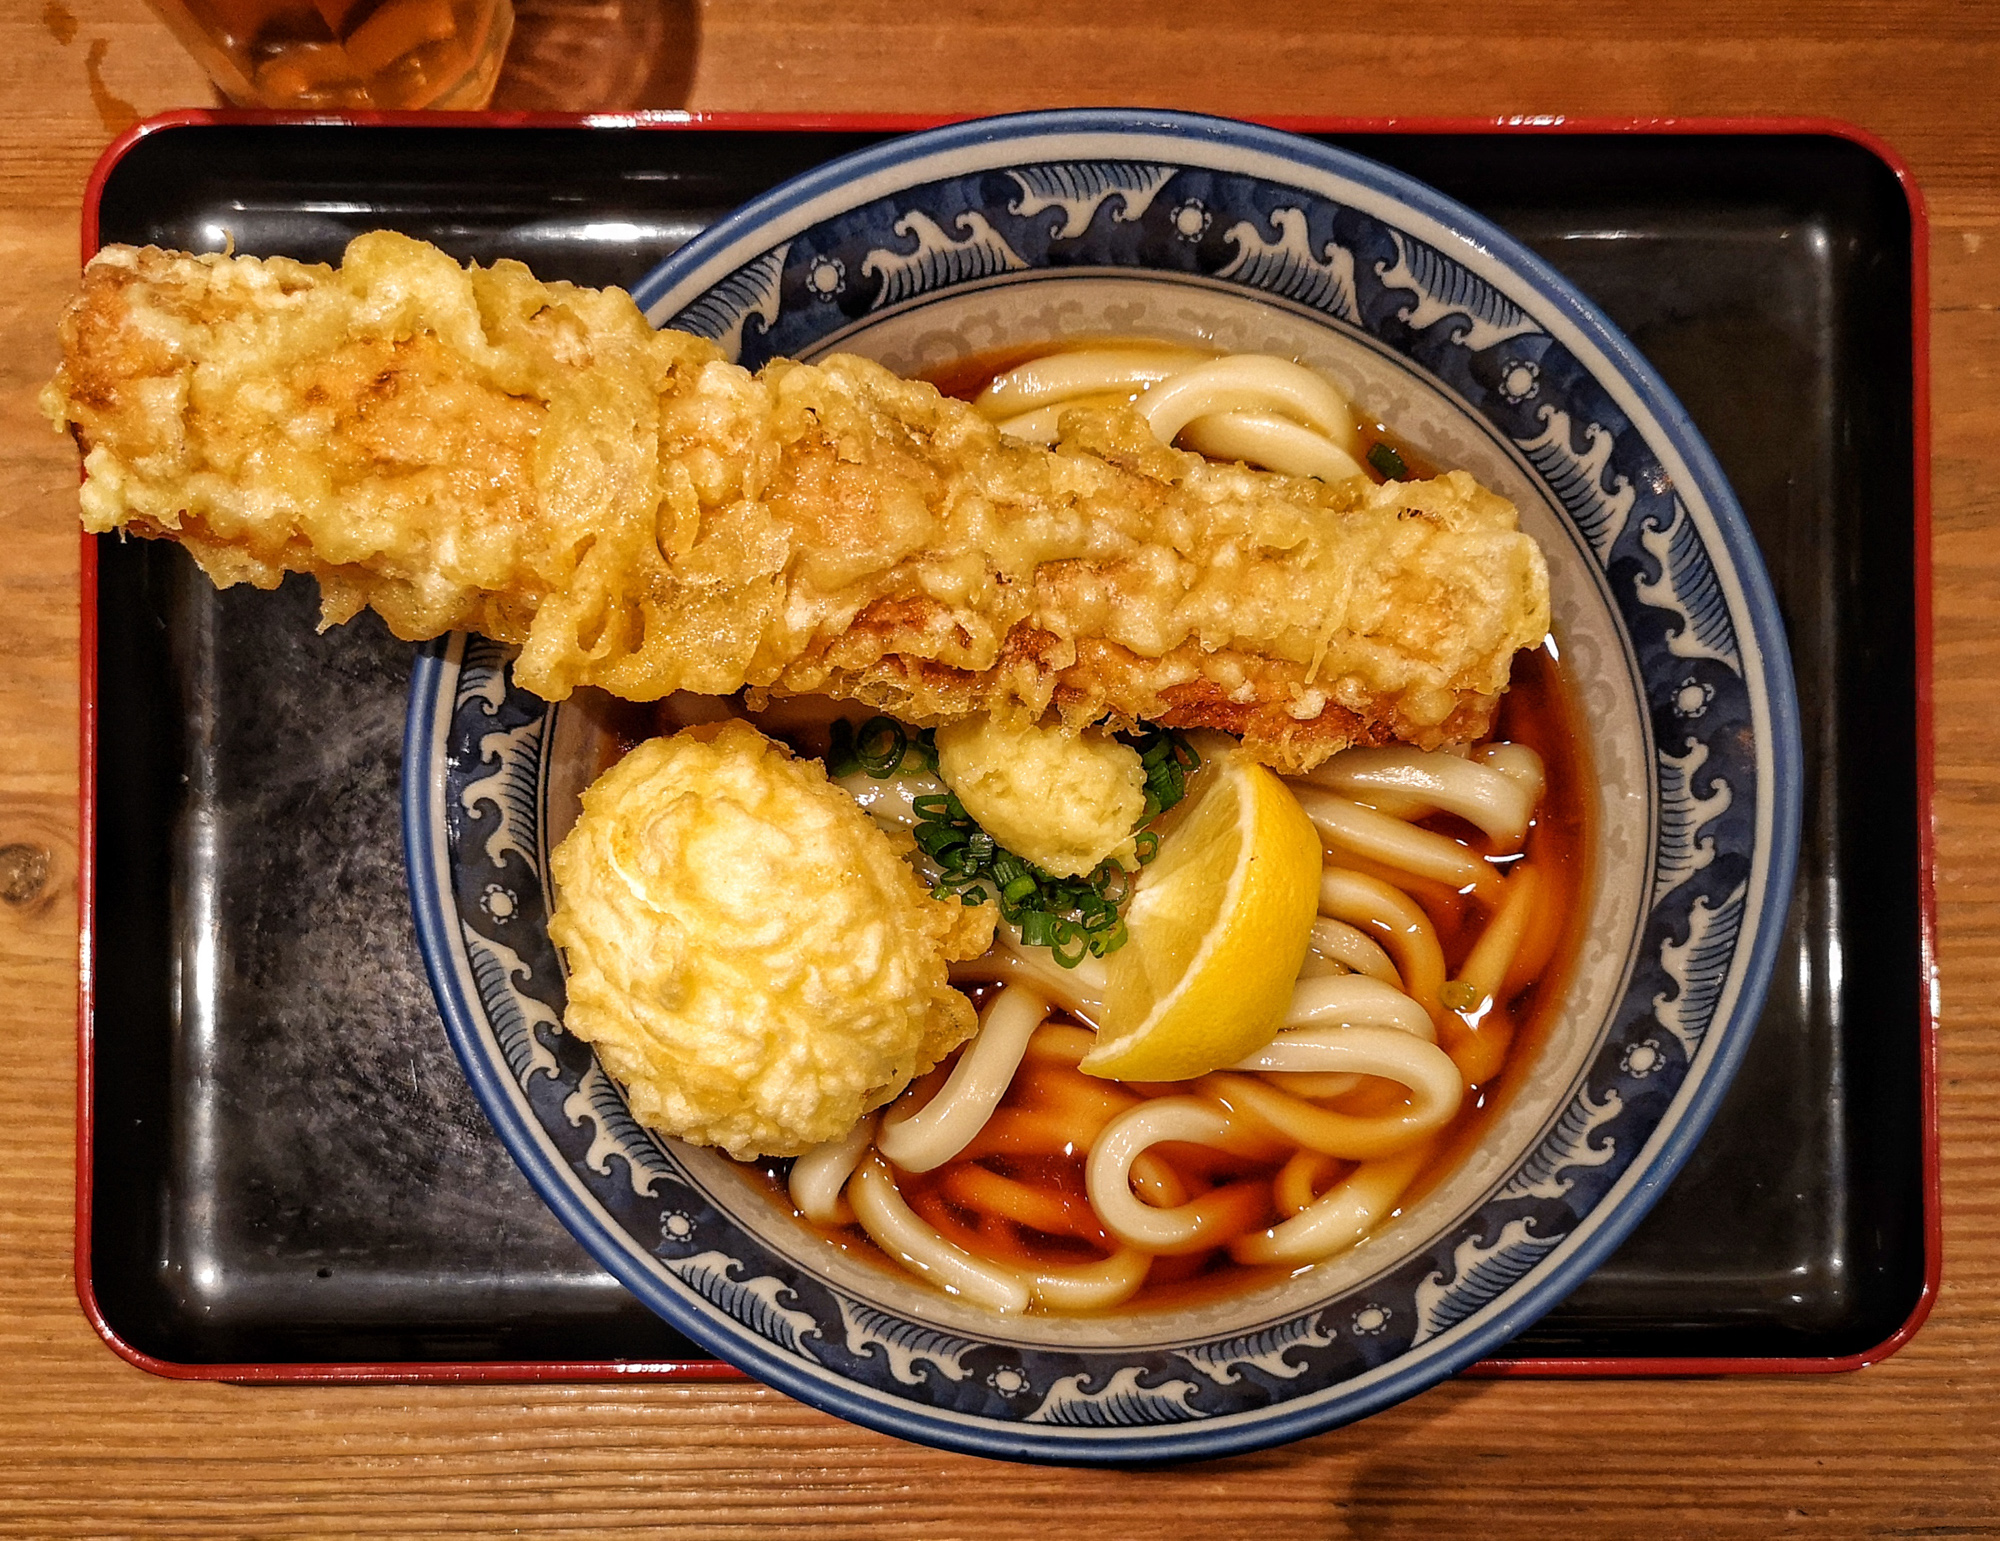  Udon Noodles, Kyoto Station. Huawei P20 Pro 